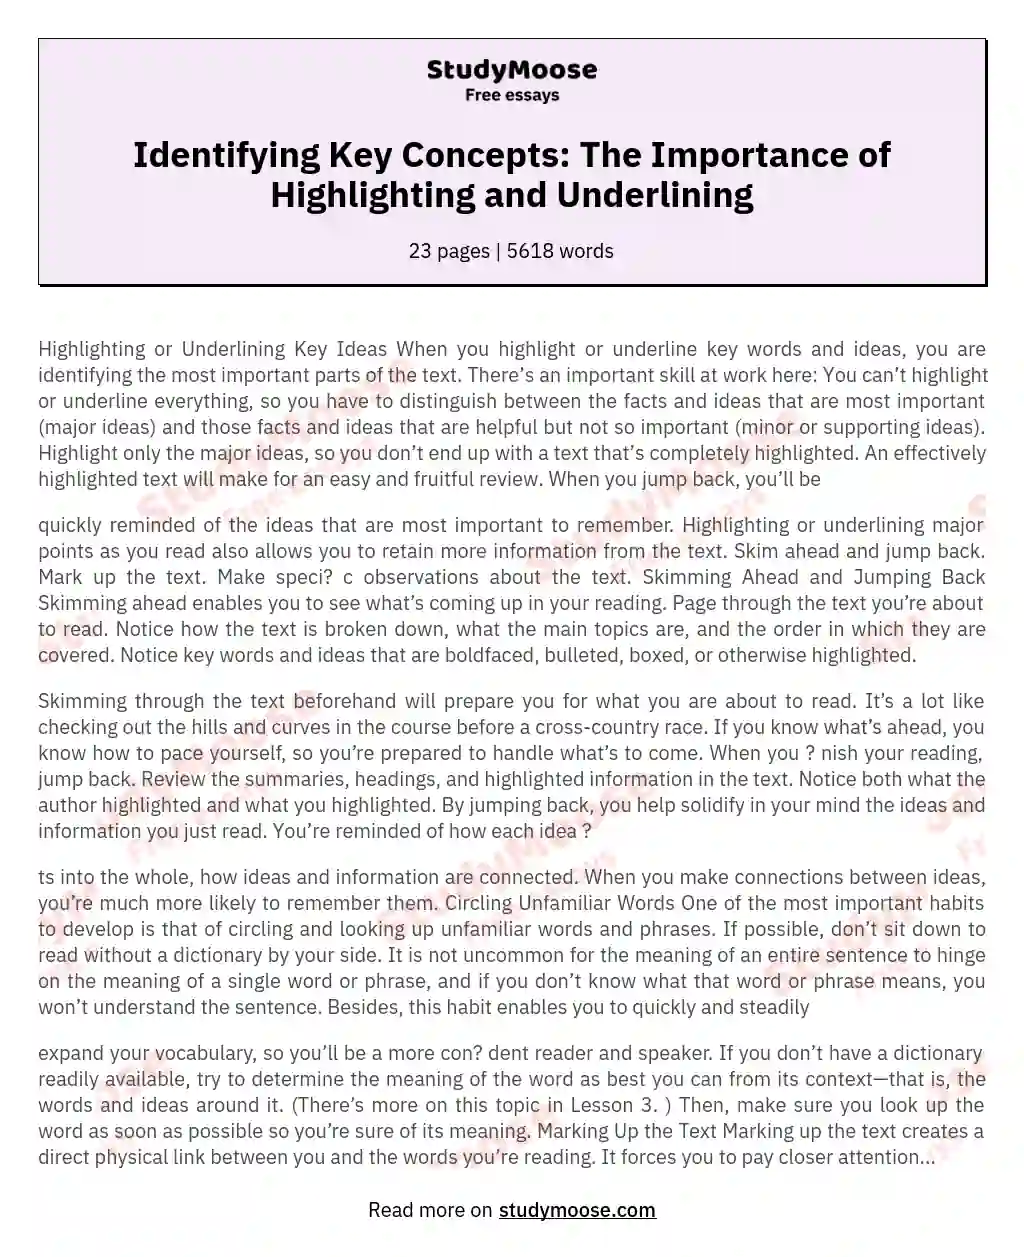 Identifying Key Concepts: The Importance of Highlighting and Underlining essay